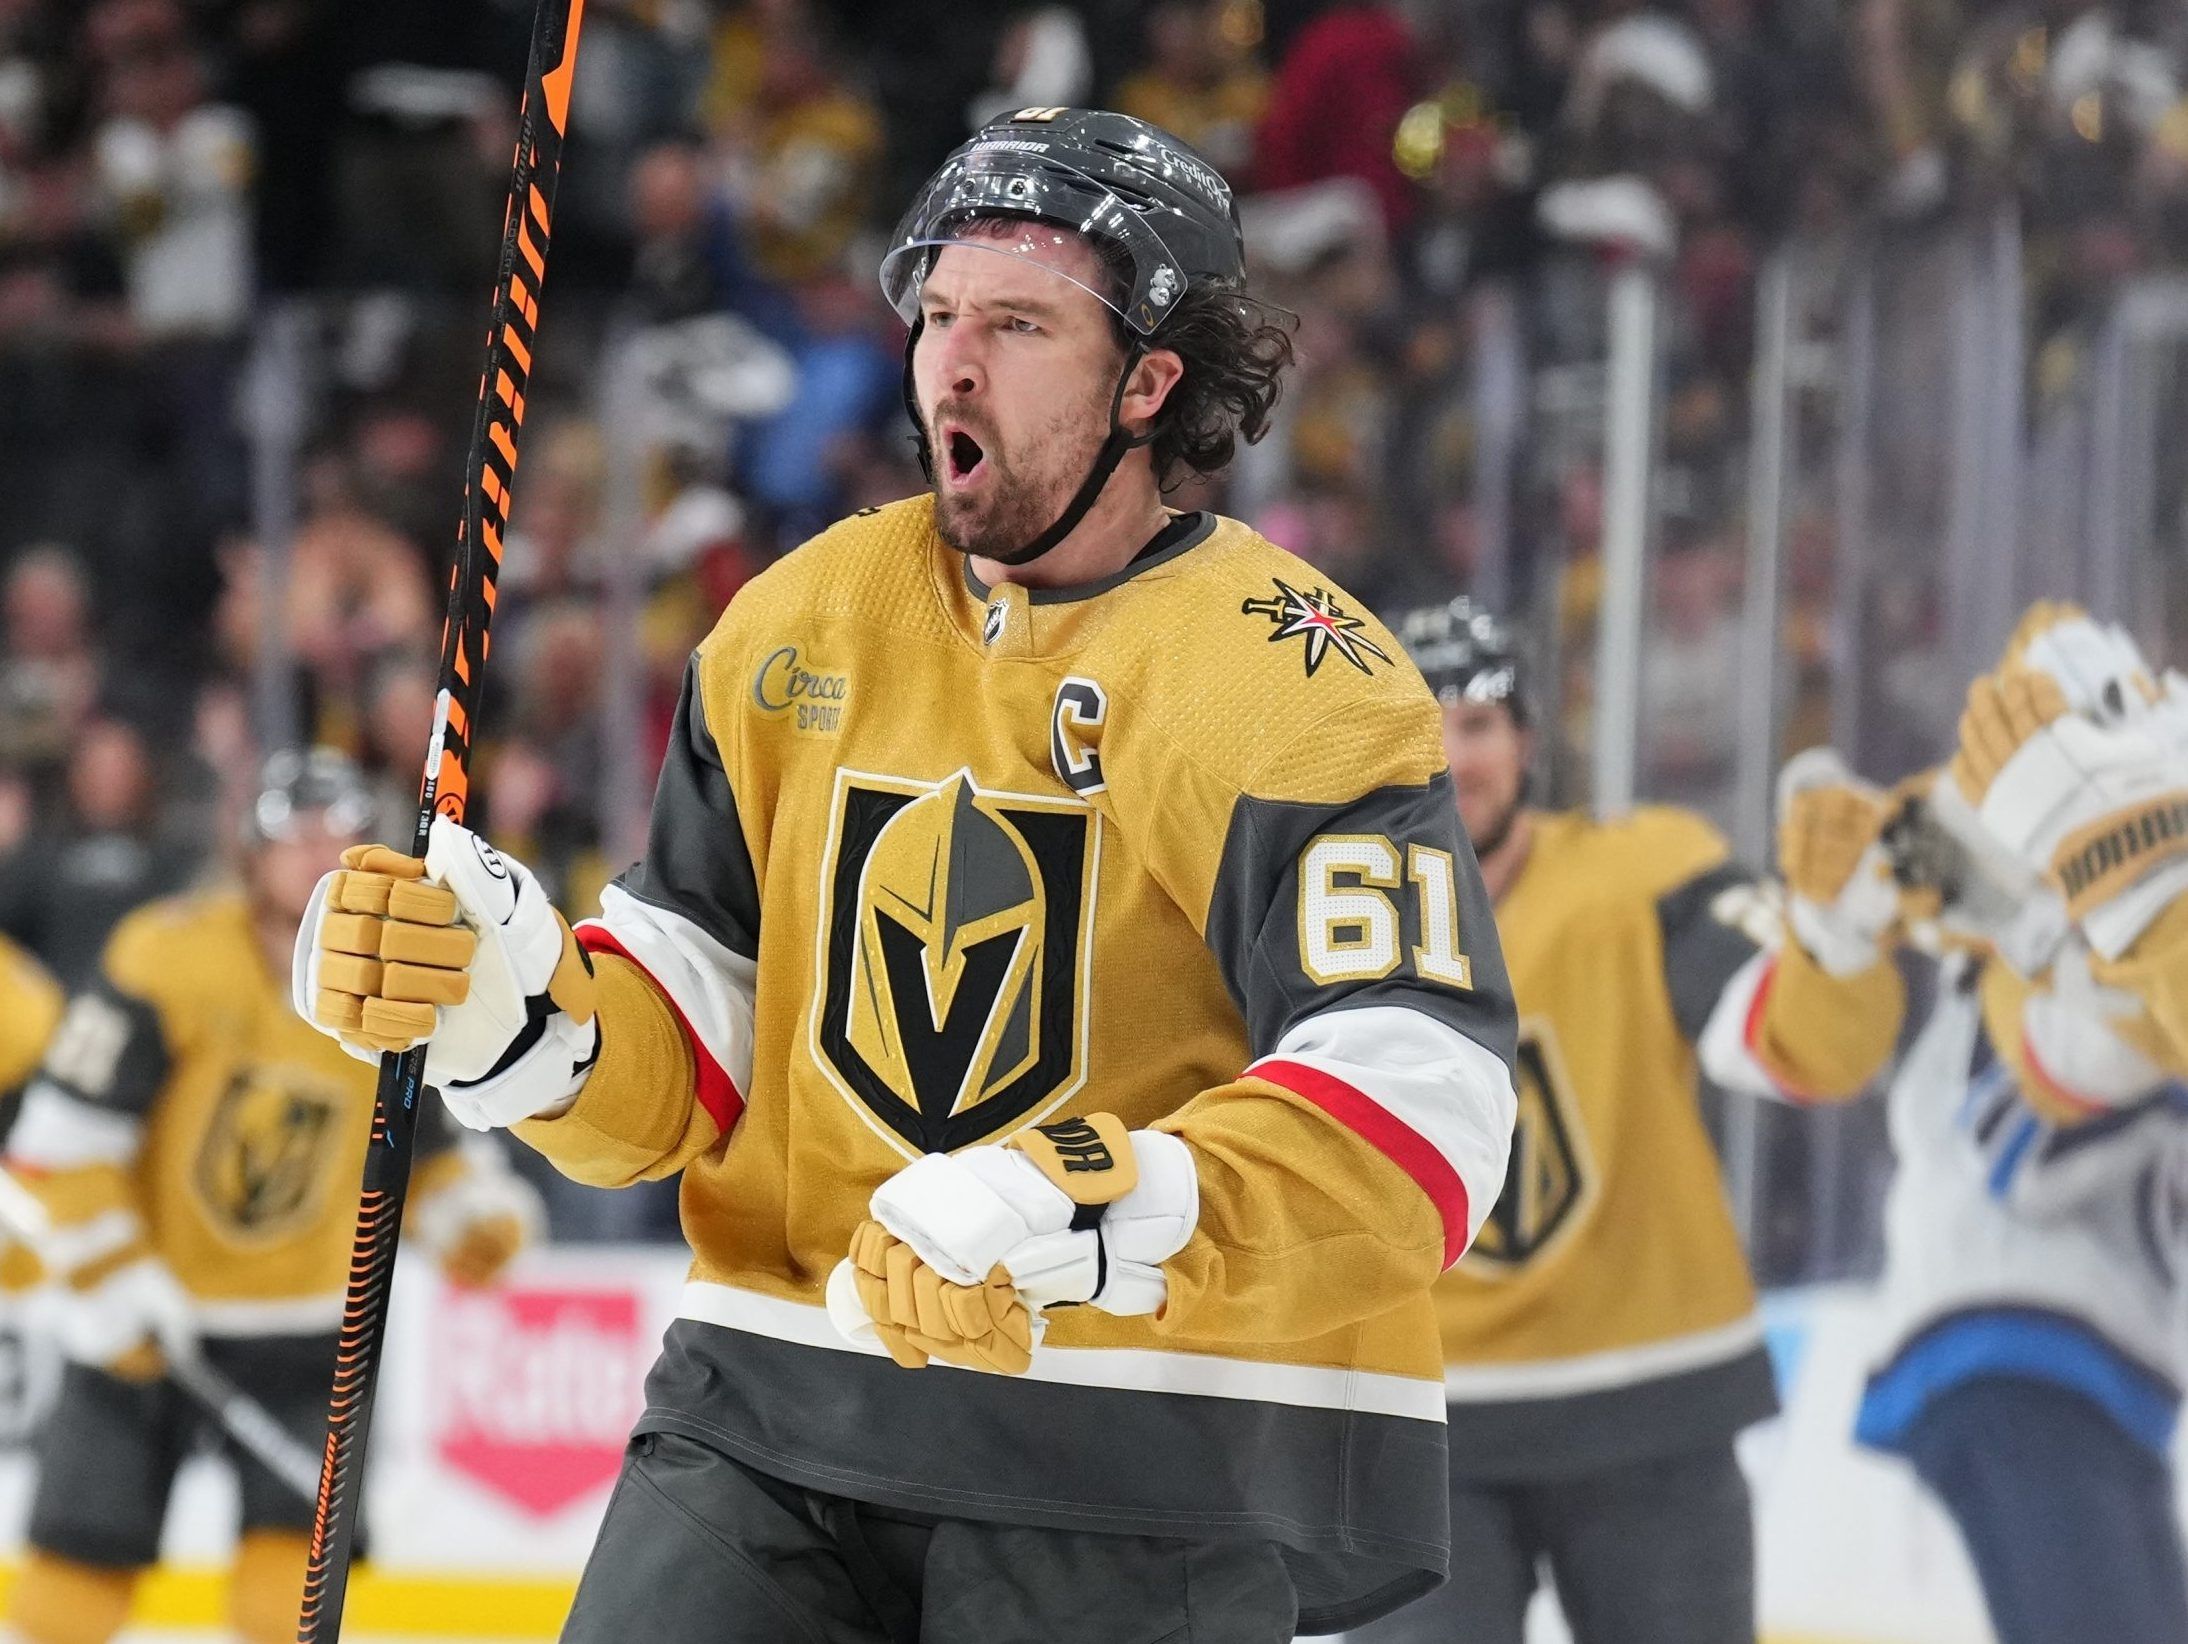 Why Moving Jonathan Marchessault Makes Sense for the Golden Knights